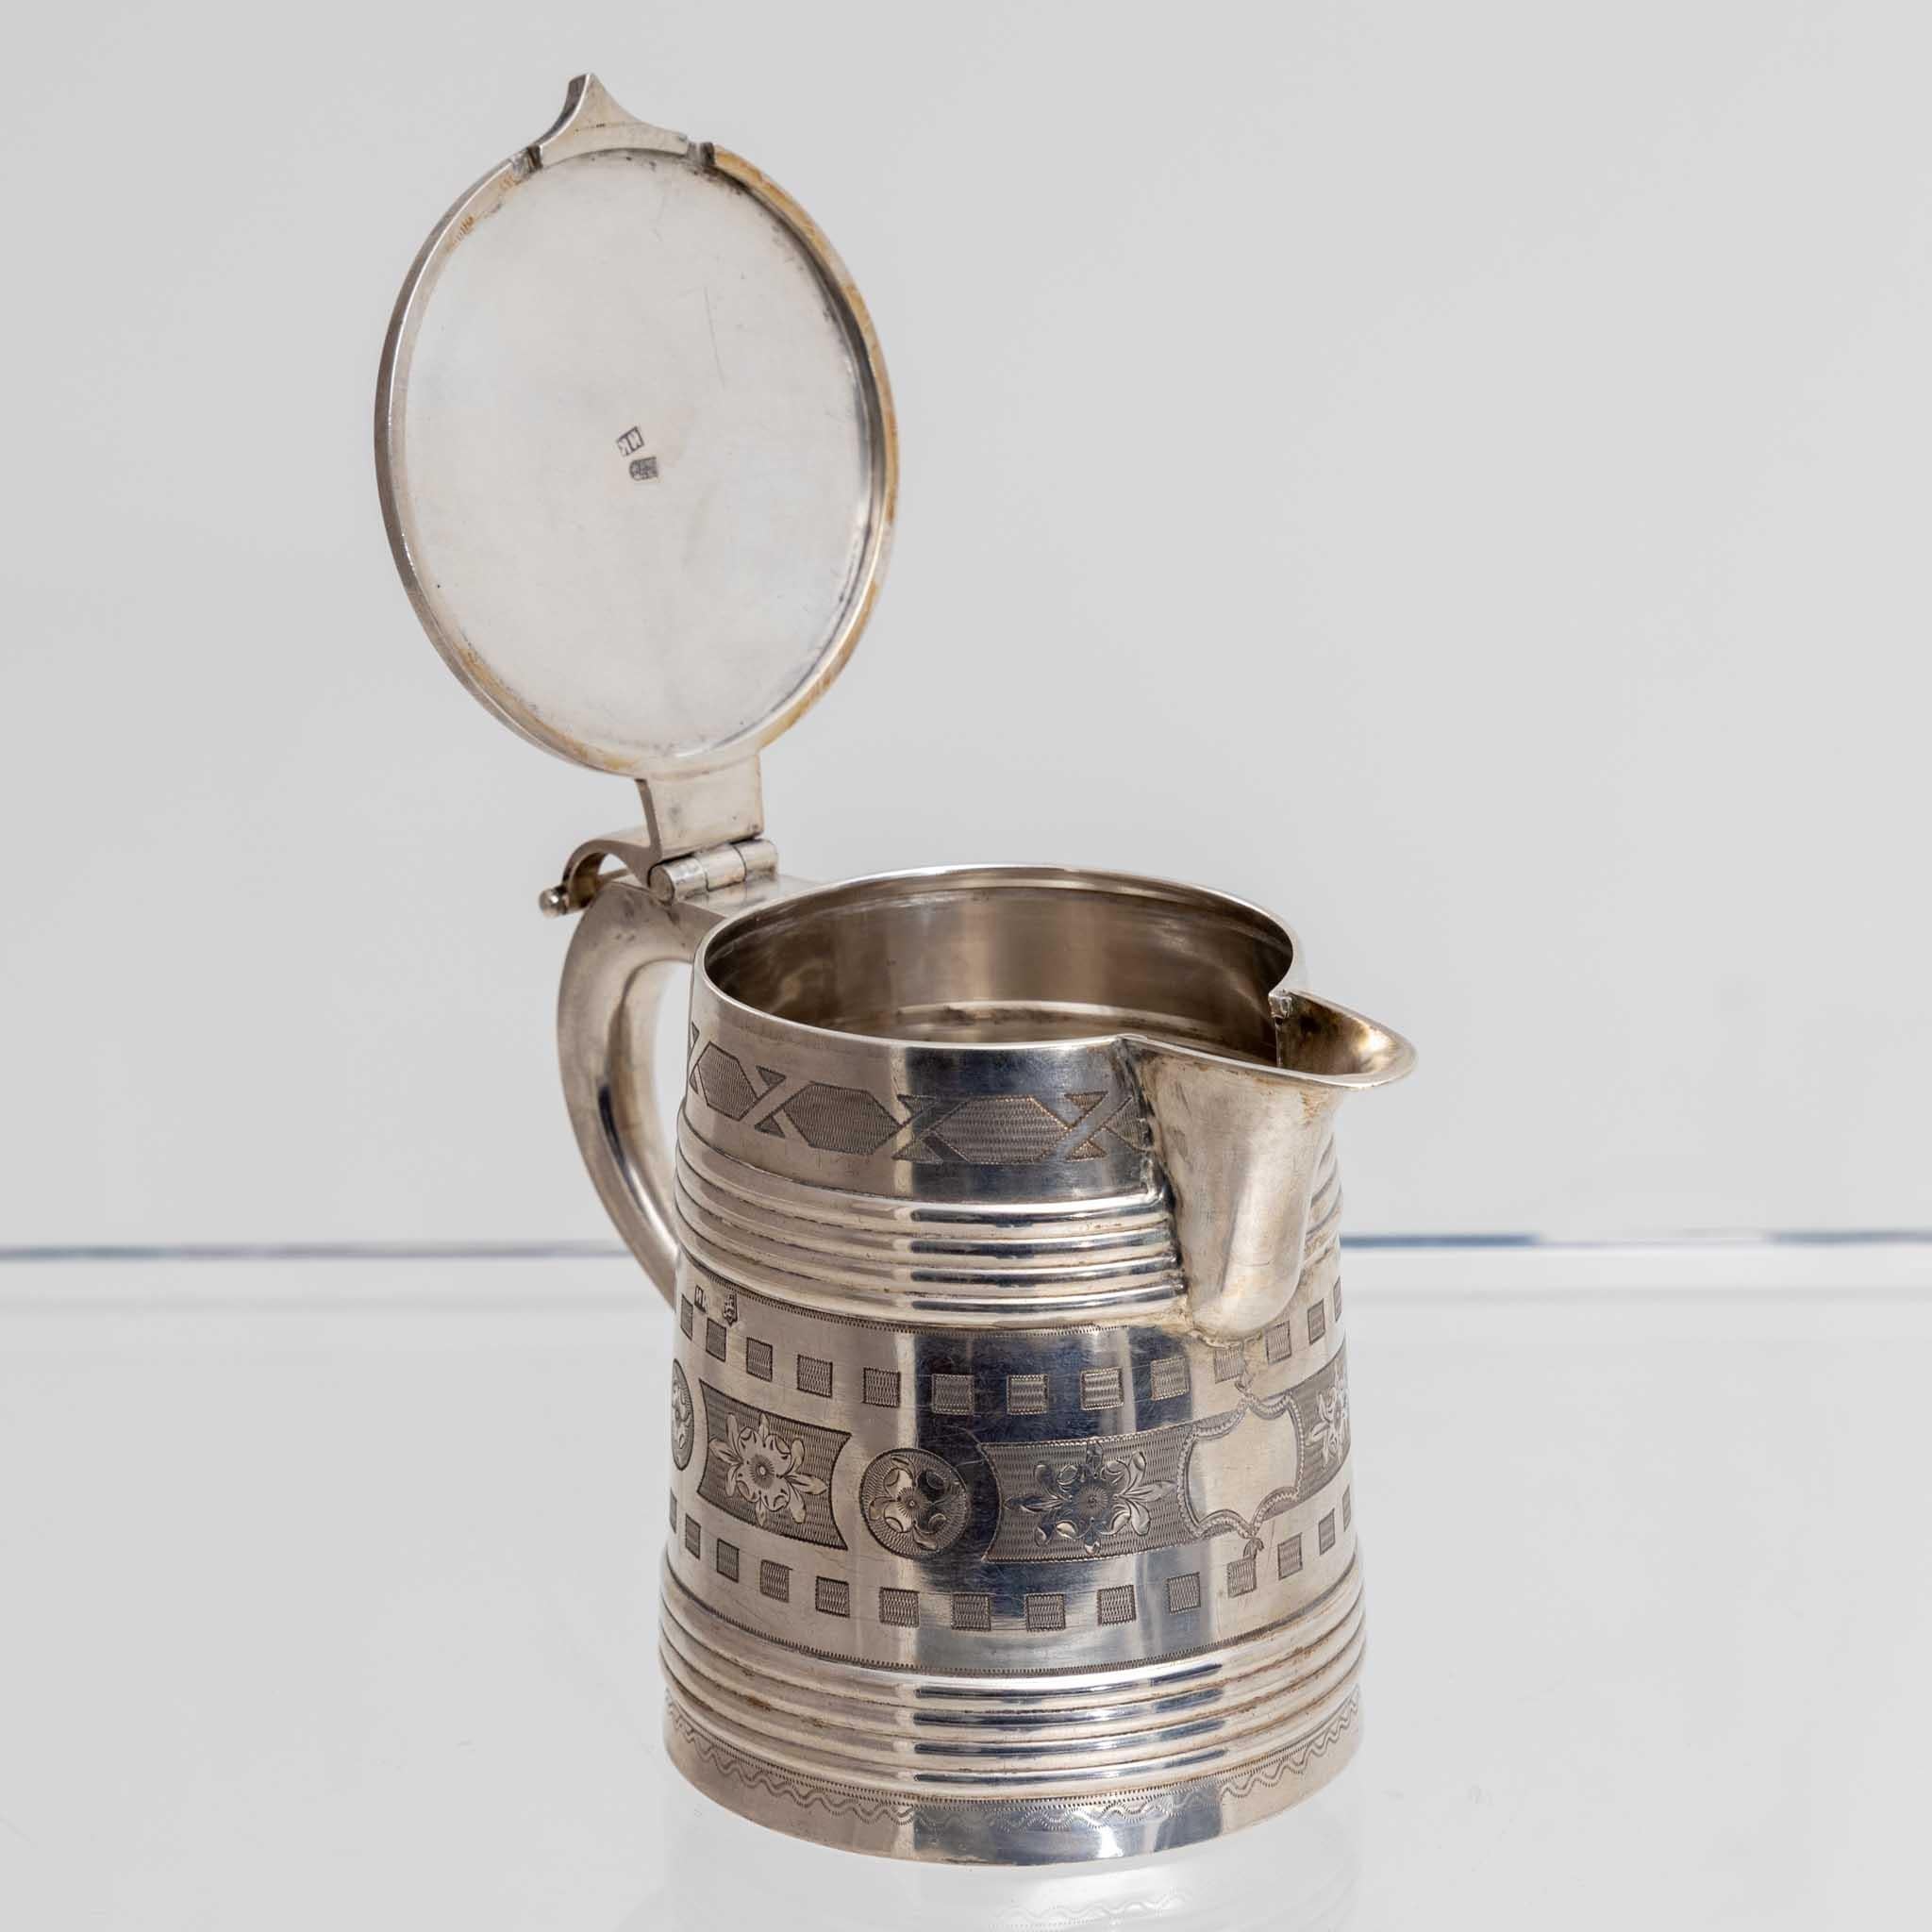 Silver tankard made by Ivan Kuzminin (1875-1895), stamped Moscow 1878, weight: 375 gr., h.: 13.5 cm.